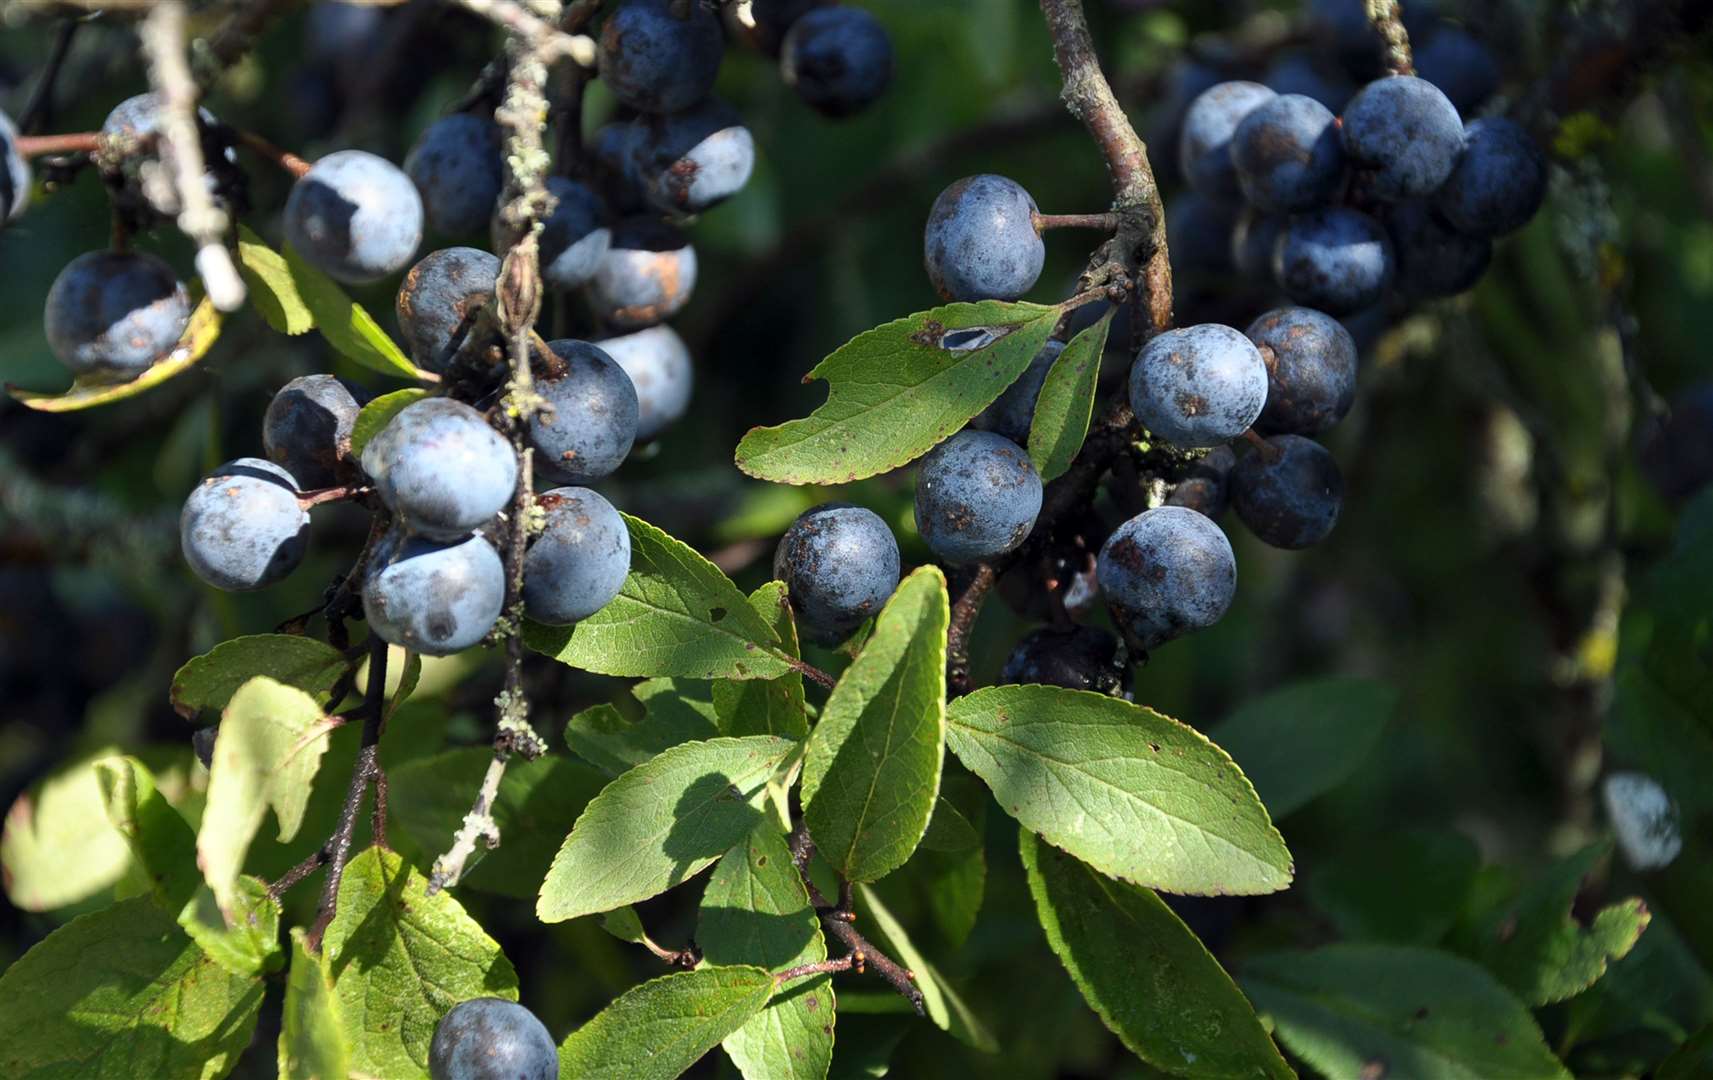 Blackthorn was associated with evil spirits in the Highlands.